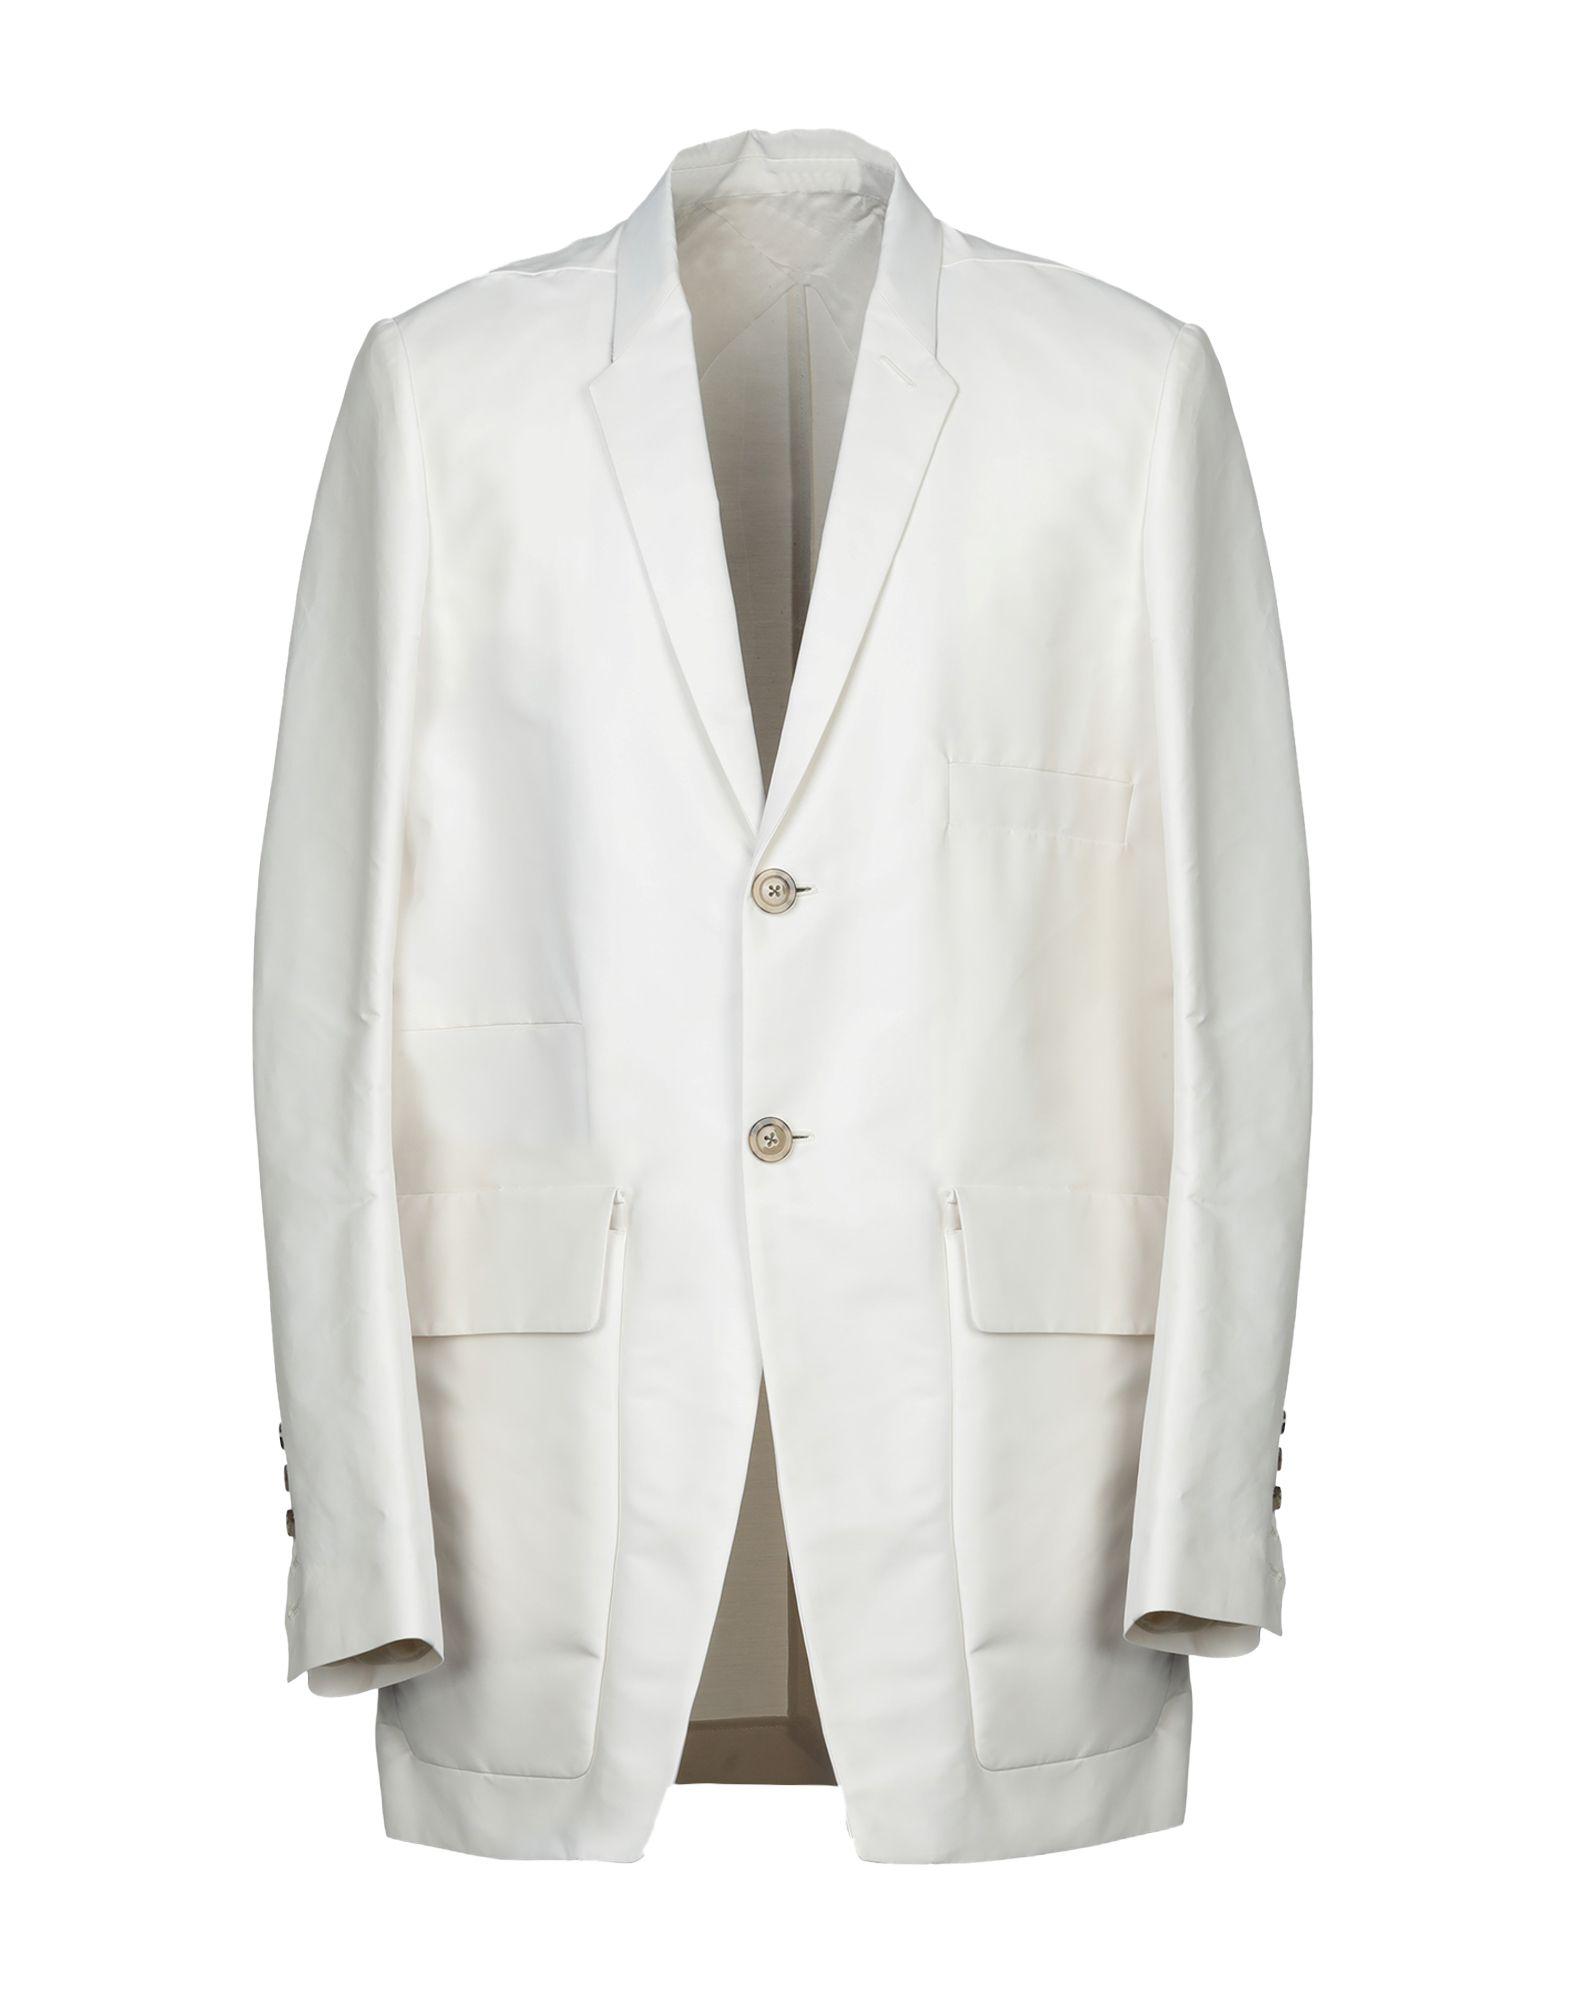 Rick Owens Synthetic Suit Jacket in White for Men - Lyst